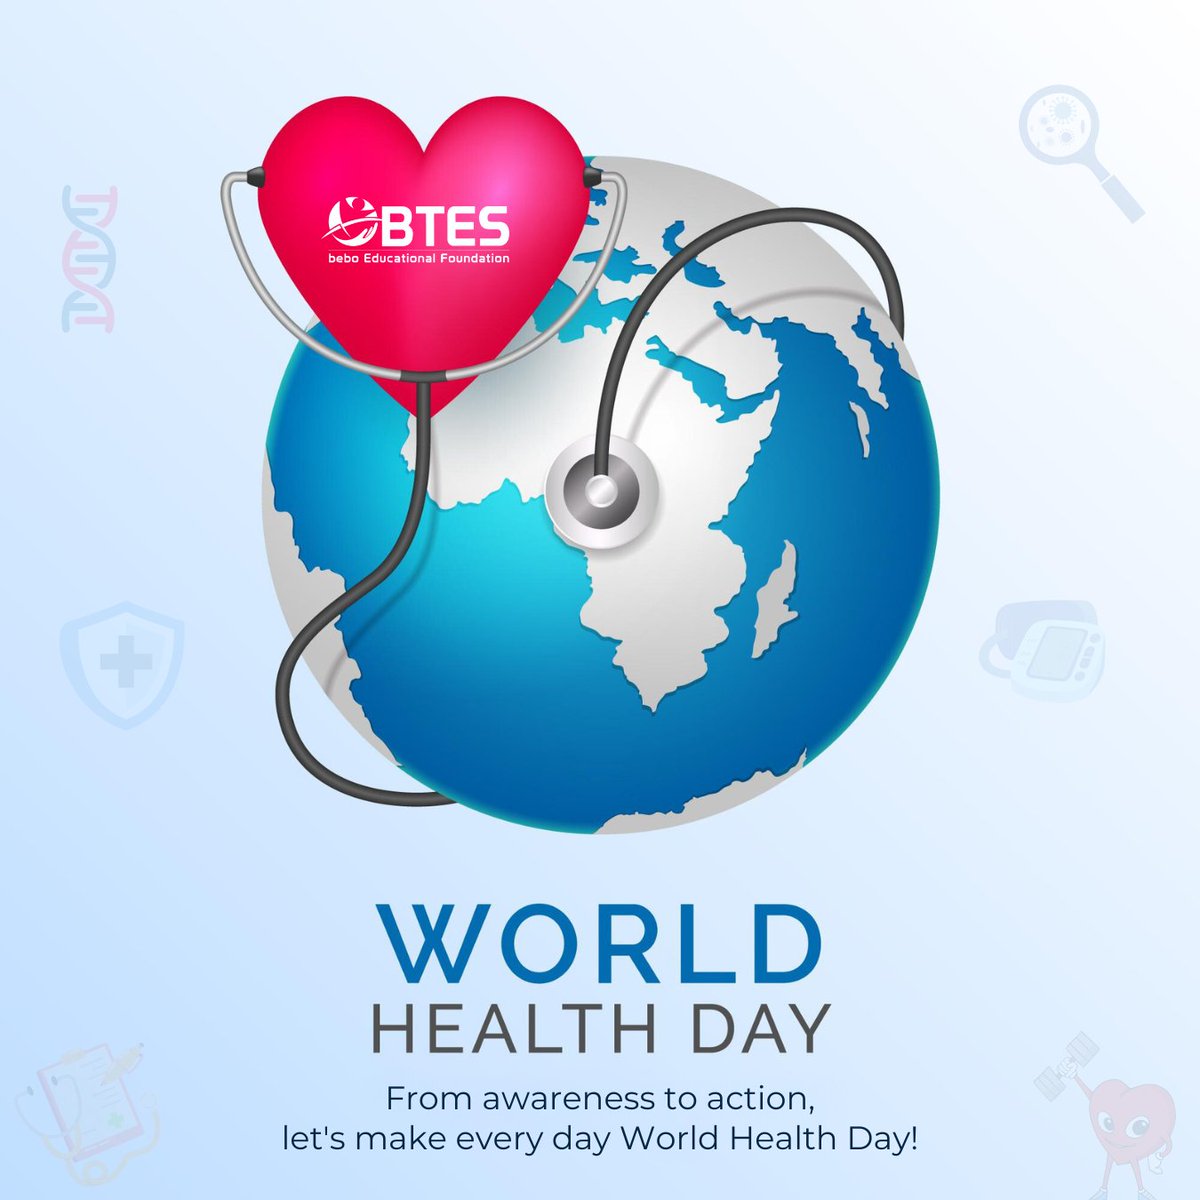 On this special occasion of World Health Day, BTES encourages you to make healthy choices that will benefit you in the long run. Stay healthy, stay happy!

#WorldHealthDay #HealthyLiving #HealthyChoices #StayHealthy #beboTechnologies #BTES